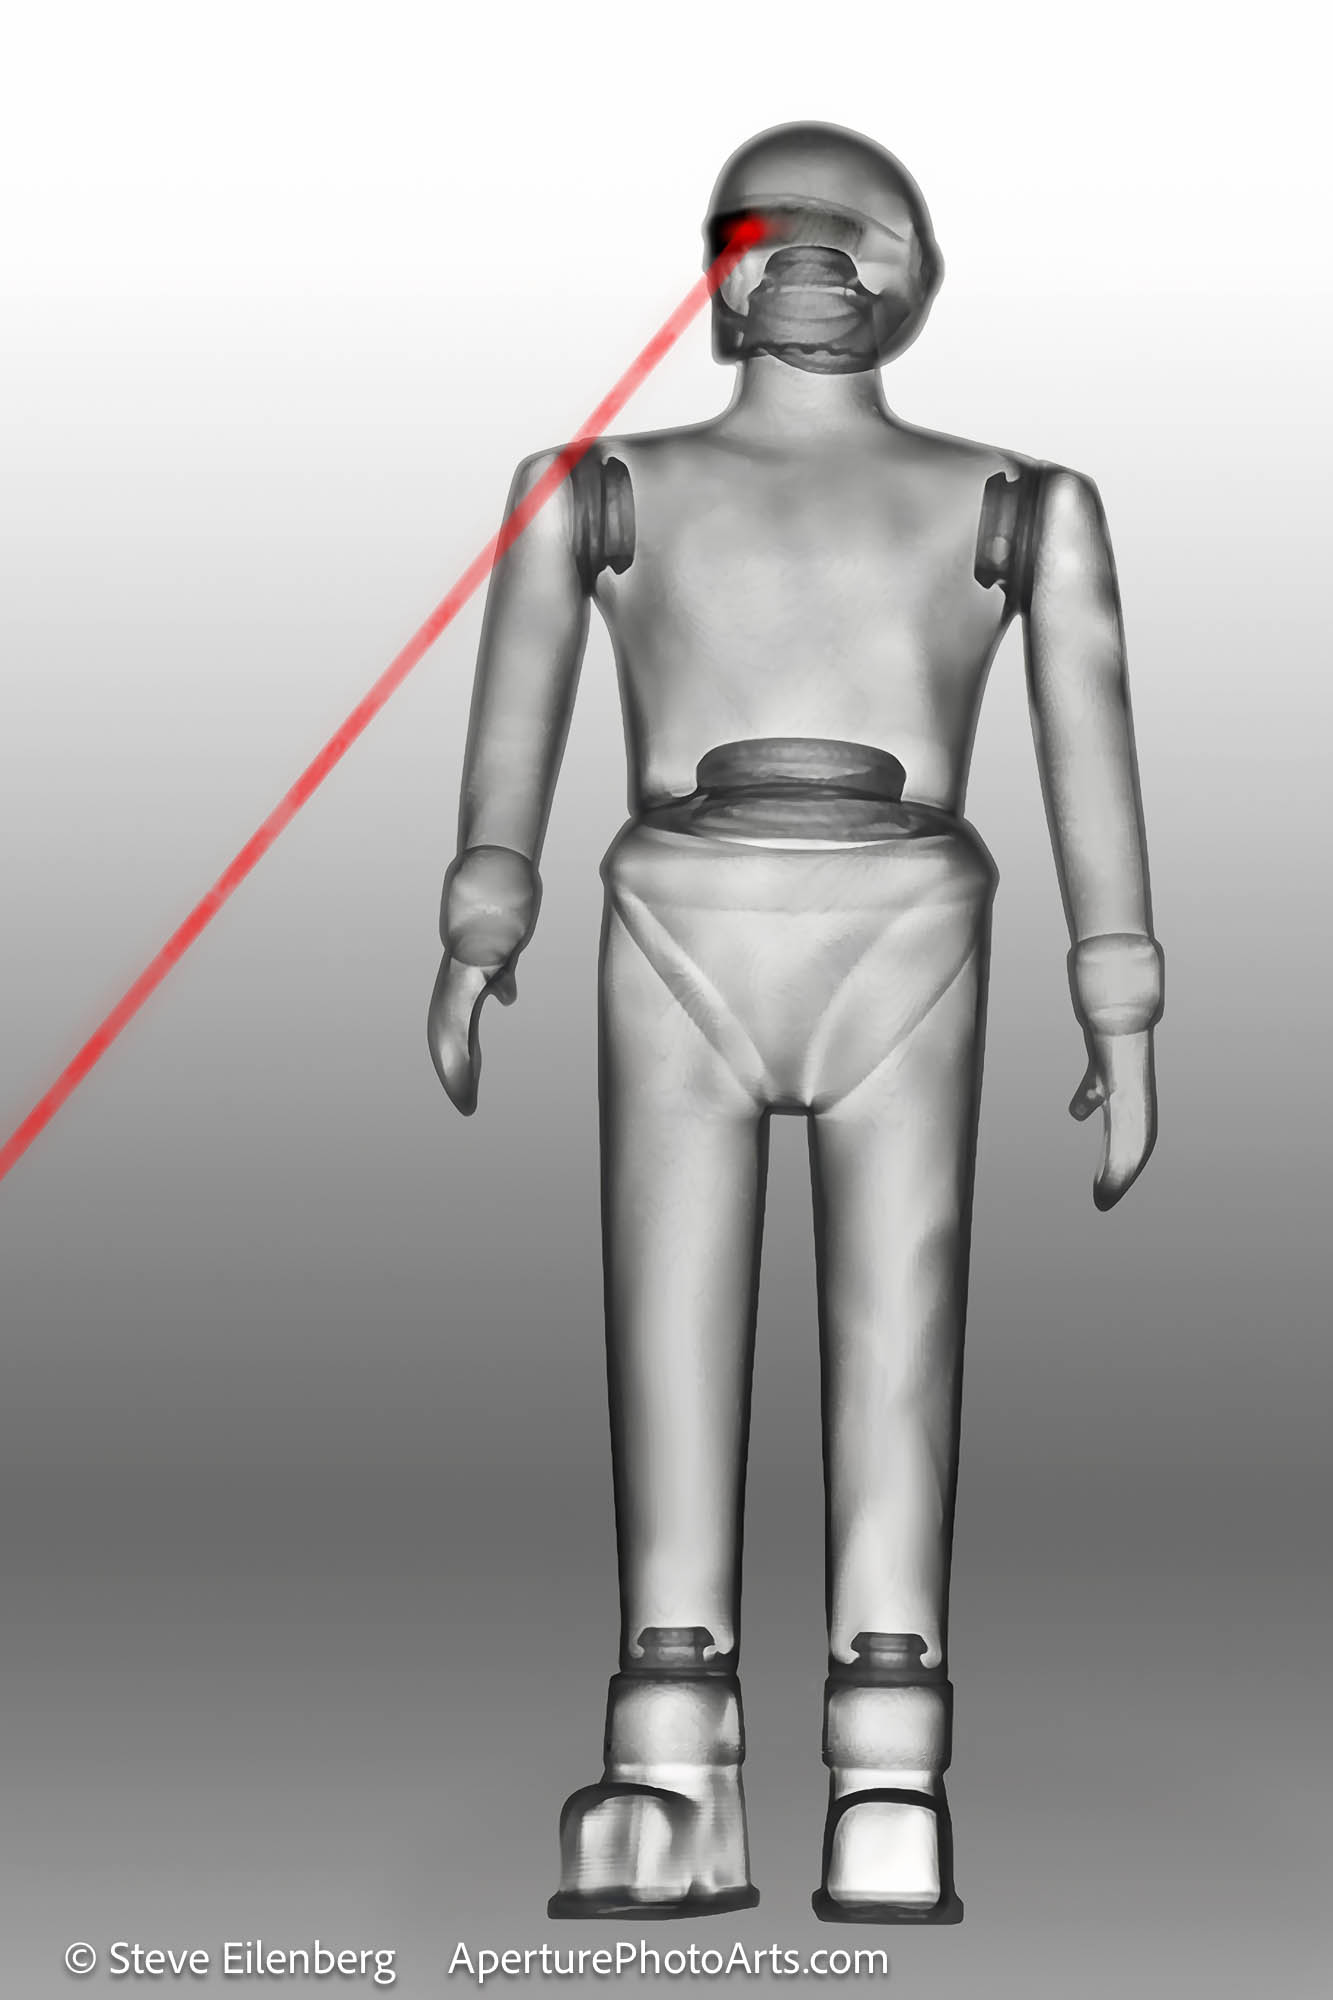 X-Ray Gort with red laser